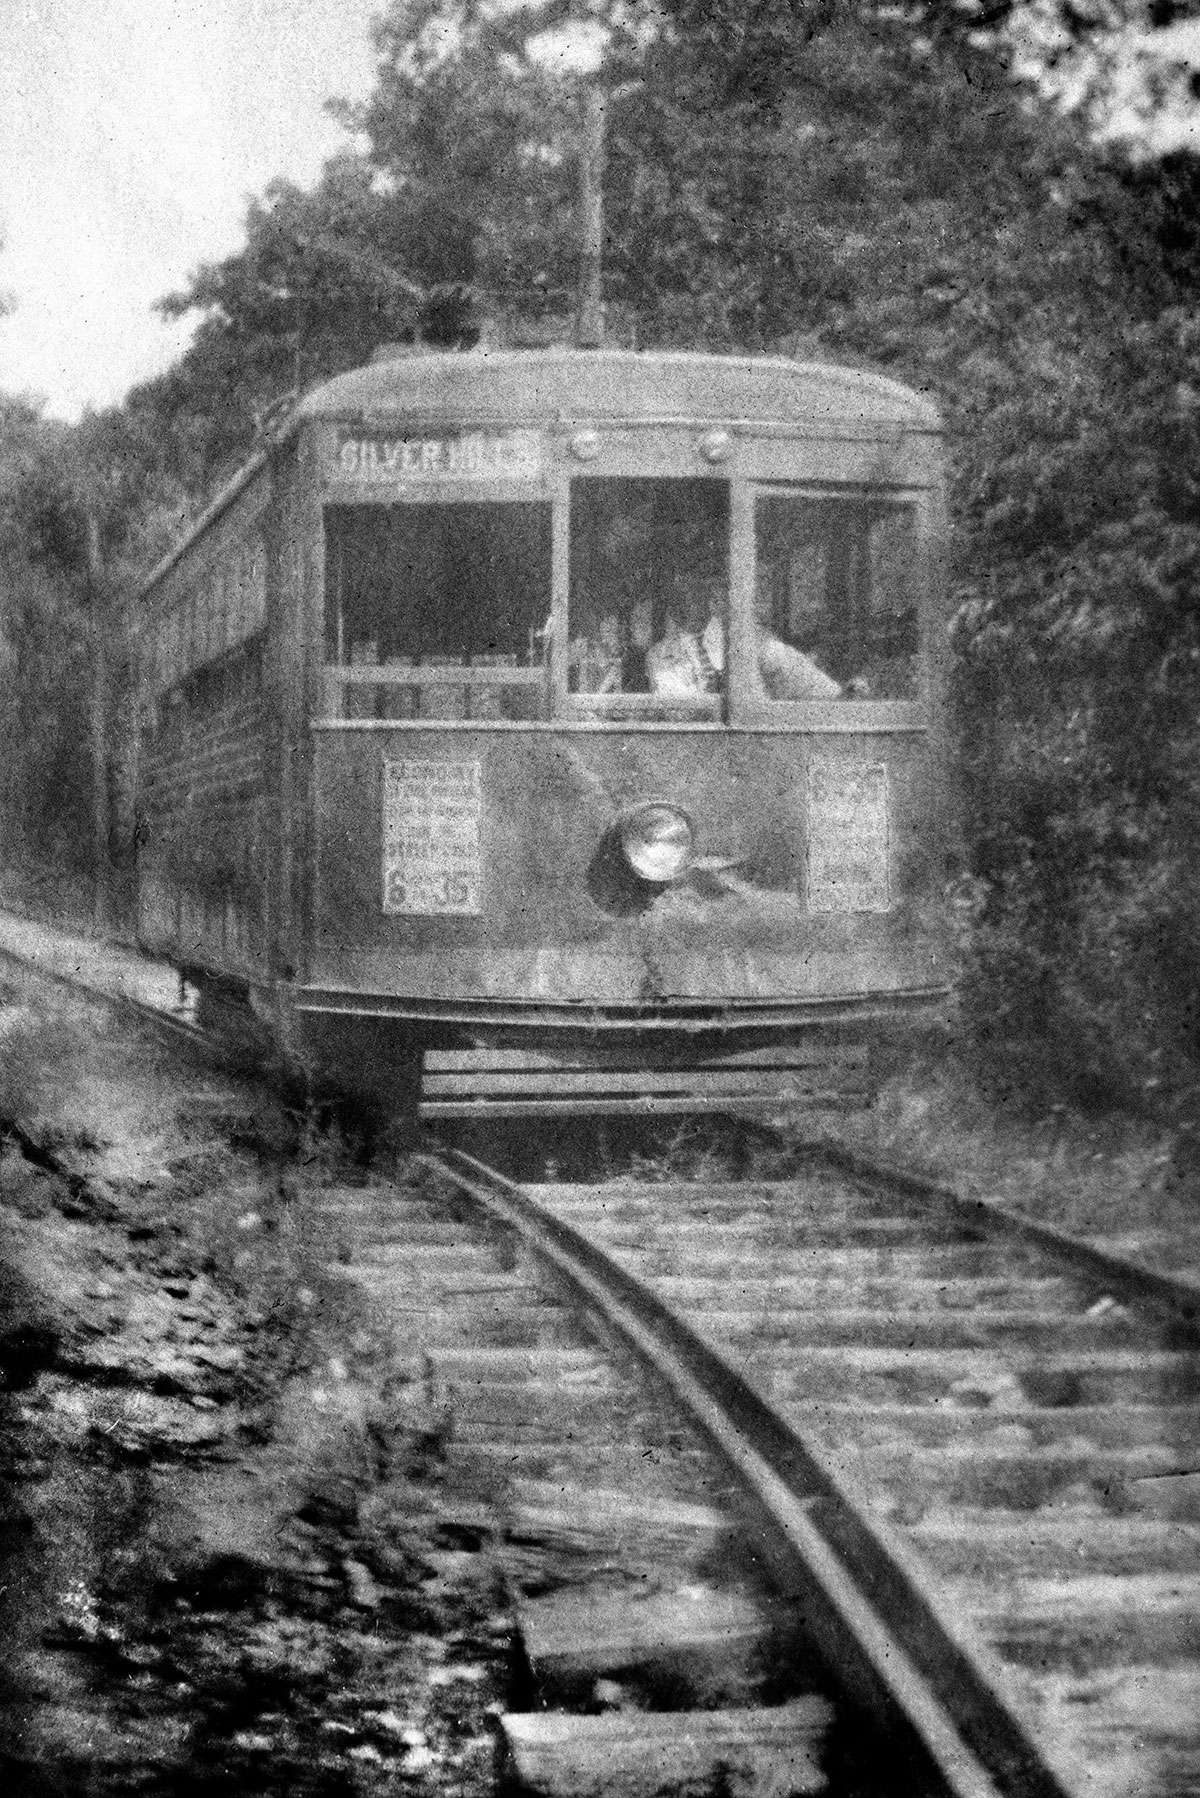 Birney Car on The Silver Hills Line